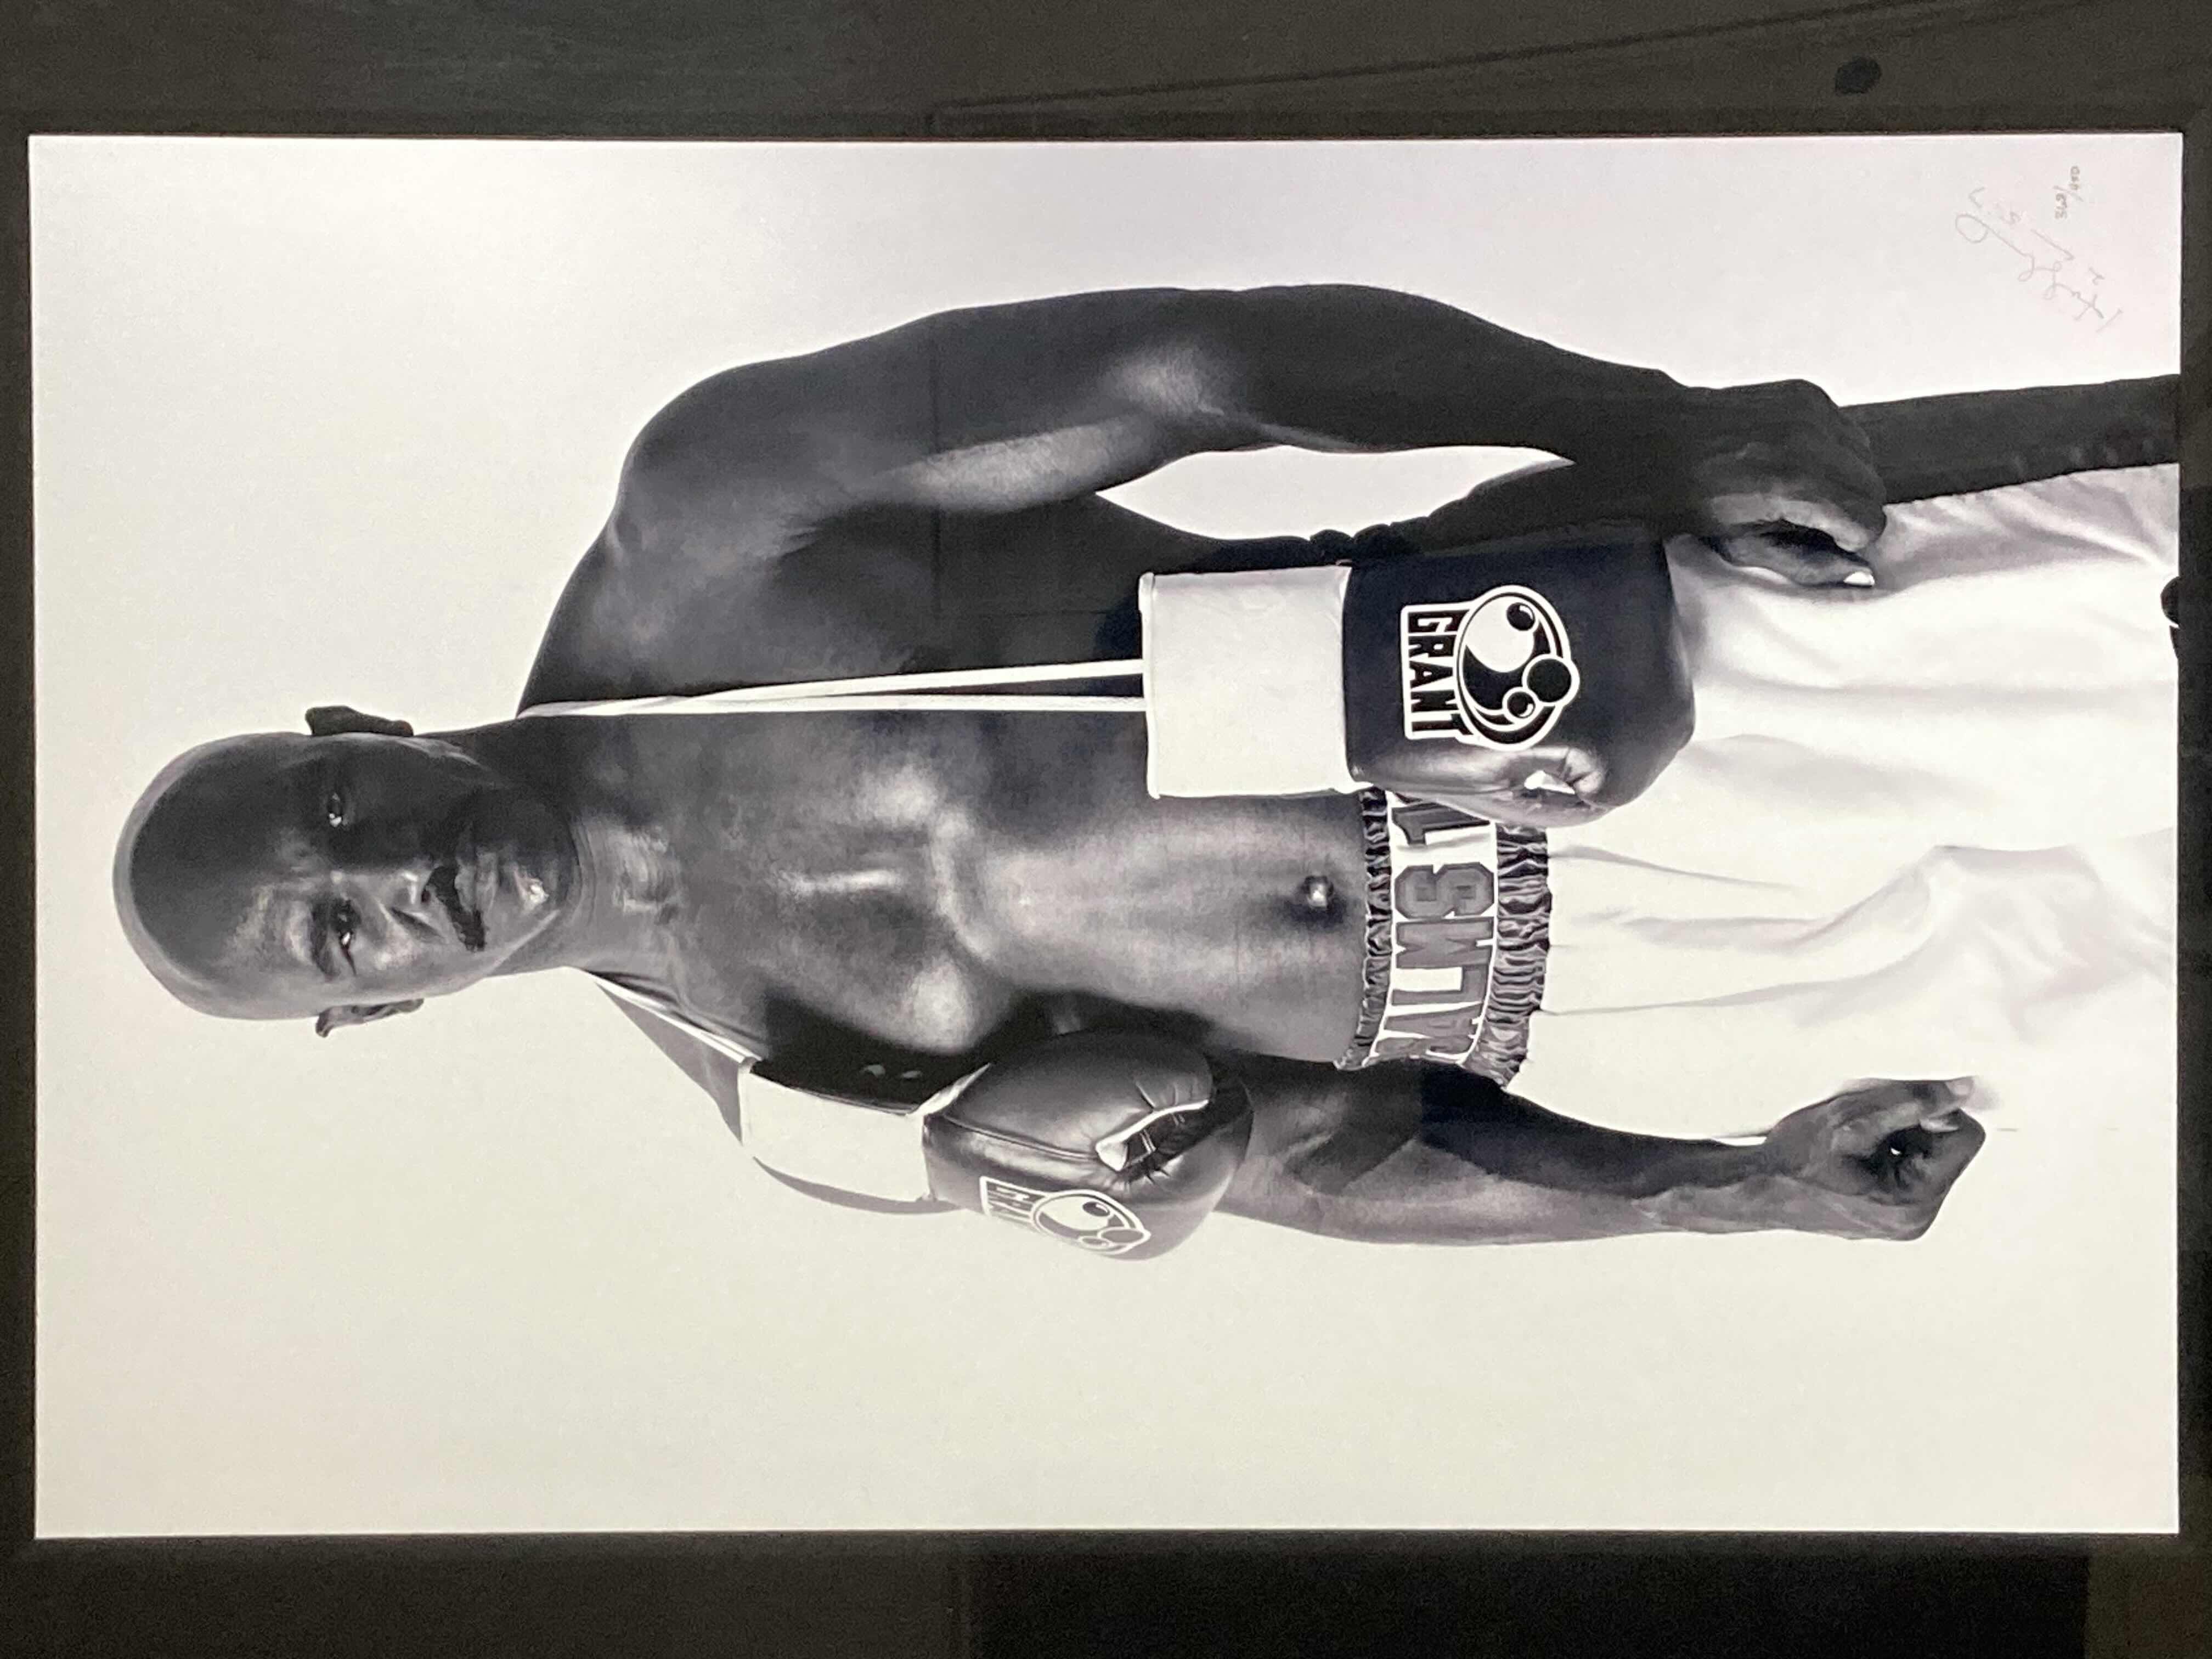 Photo 2 of EVANDER HOLYFIELD PHOTOGRAPHED BY PETER LIK AUTOGRAPHED BY EVANDER HOLYFIELD 368/450 41” X 2.75” H54.5”